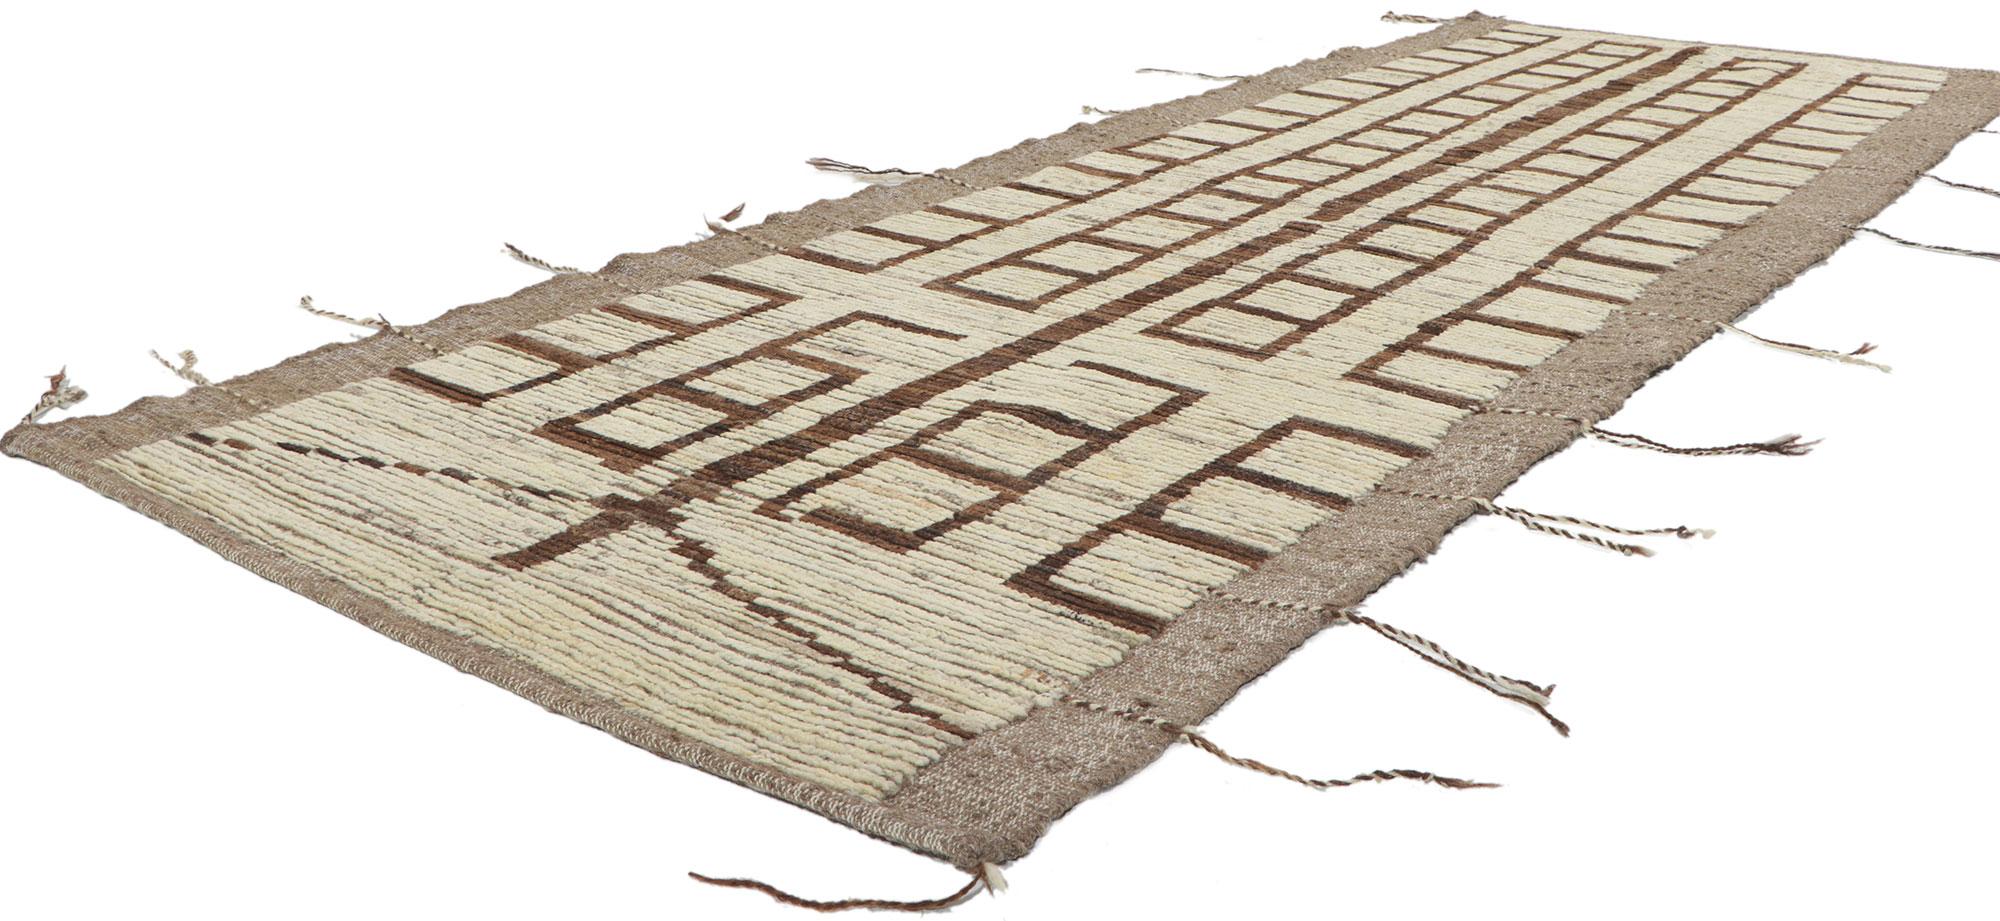 80766 new Contemporary Moroccan Runner with Bauhaus style, 03'04 x 09'04. With its subtle graphic appeal, incredible detail and texture, this hand knotted wool contemporary Moroccan runner is a captivating vision of woven beauty. The tribal pattern